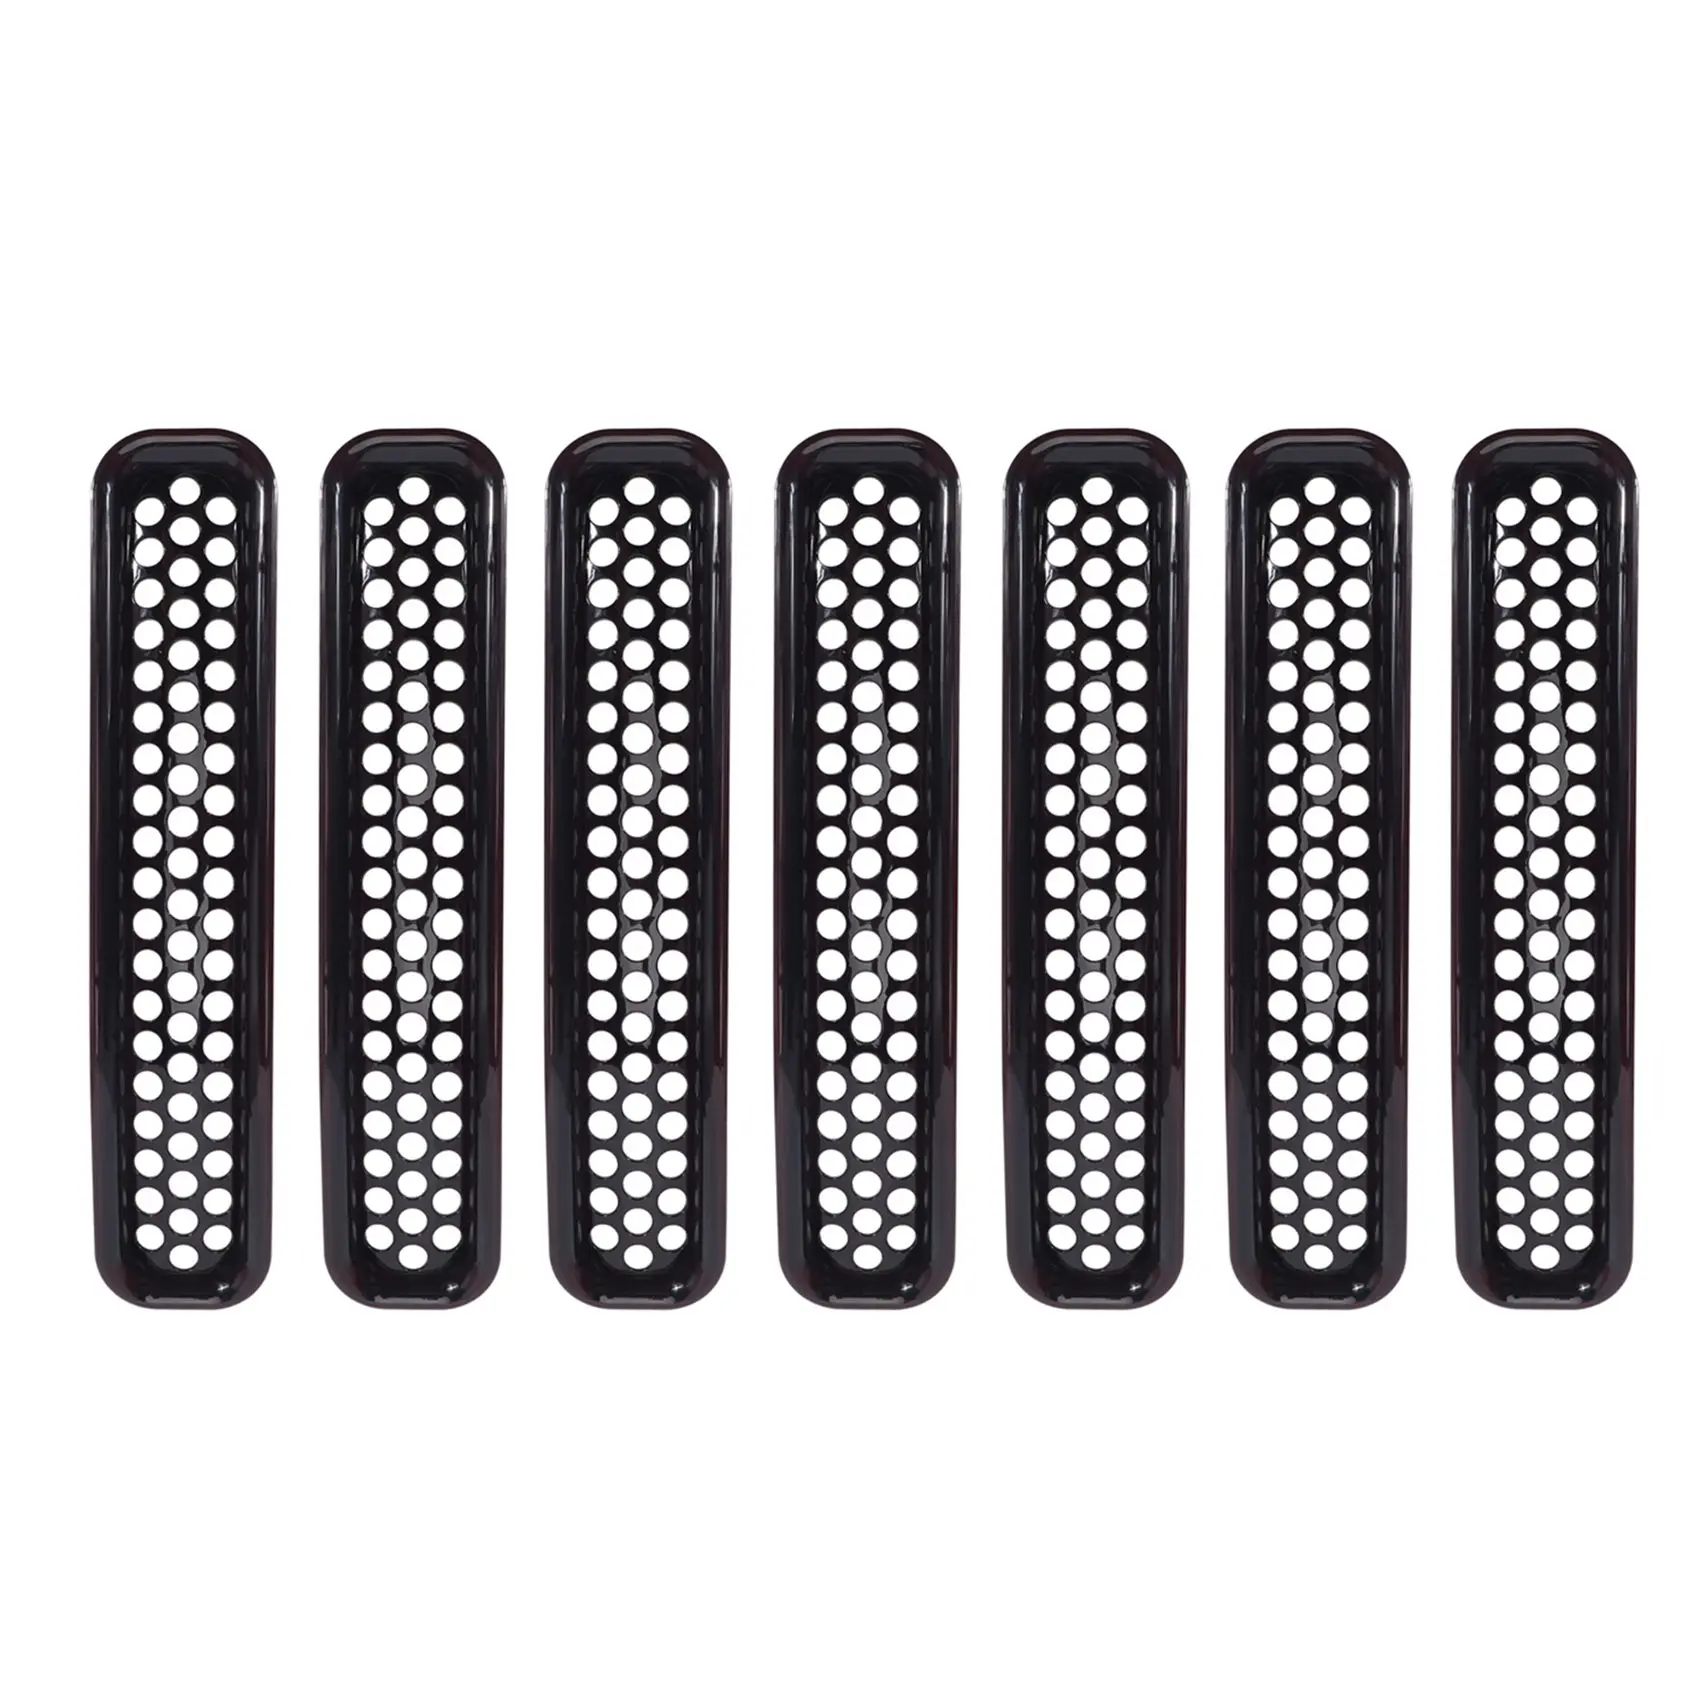 

Honeycomb Mesh Front Grill Inserts Kit for 1997-2006 Jeep Wrangler TJ & Unlimited - (7PCS)